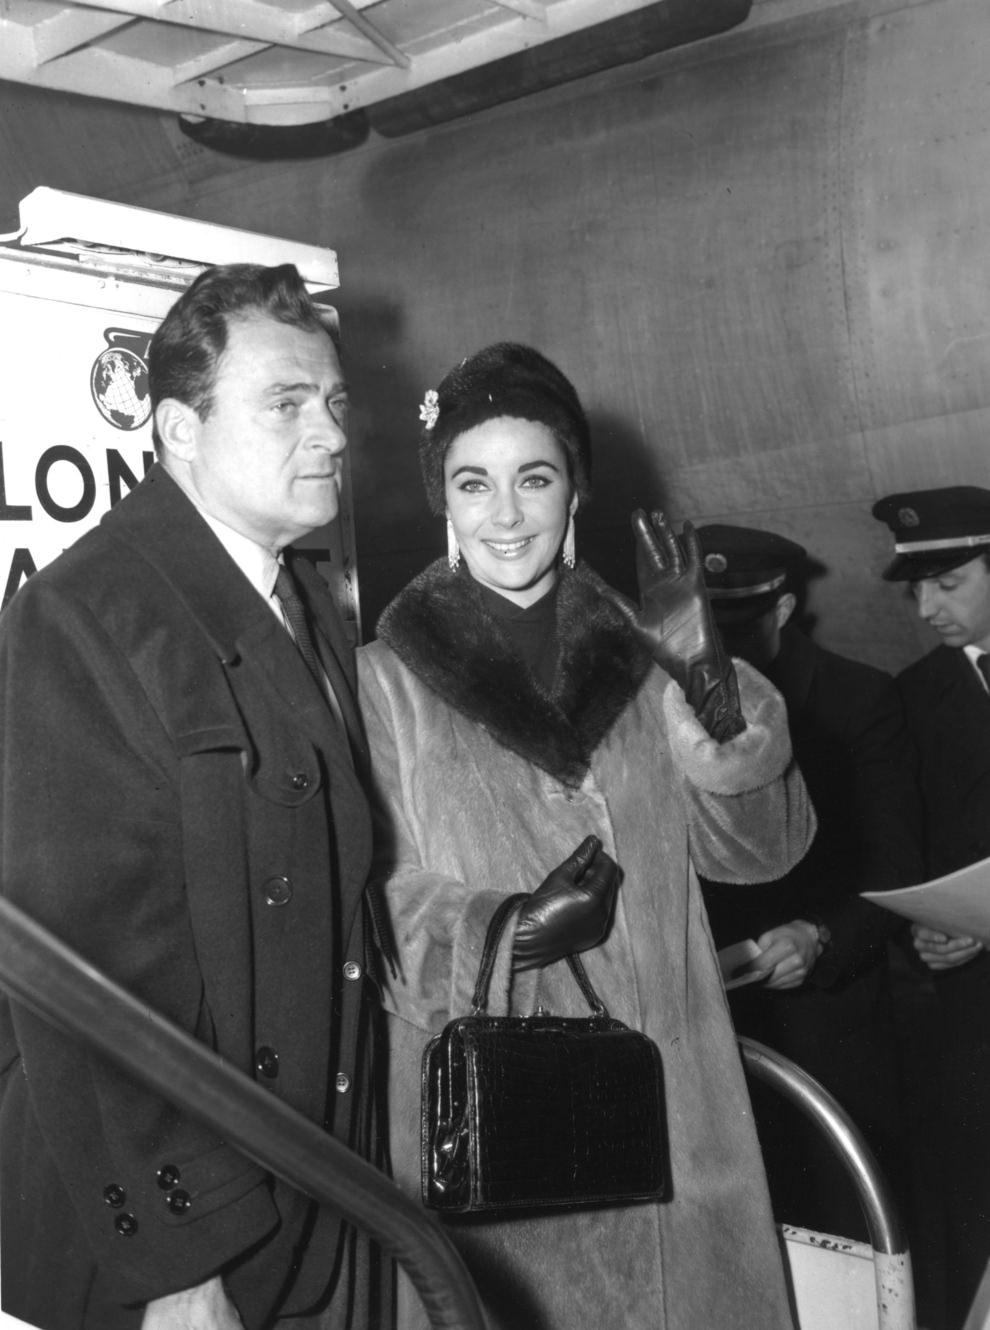 Elizabeth Taylor and husband, film producer Mike Todd, arriving at Heathrow, 1958.